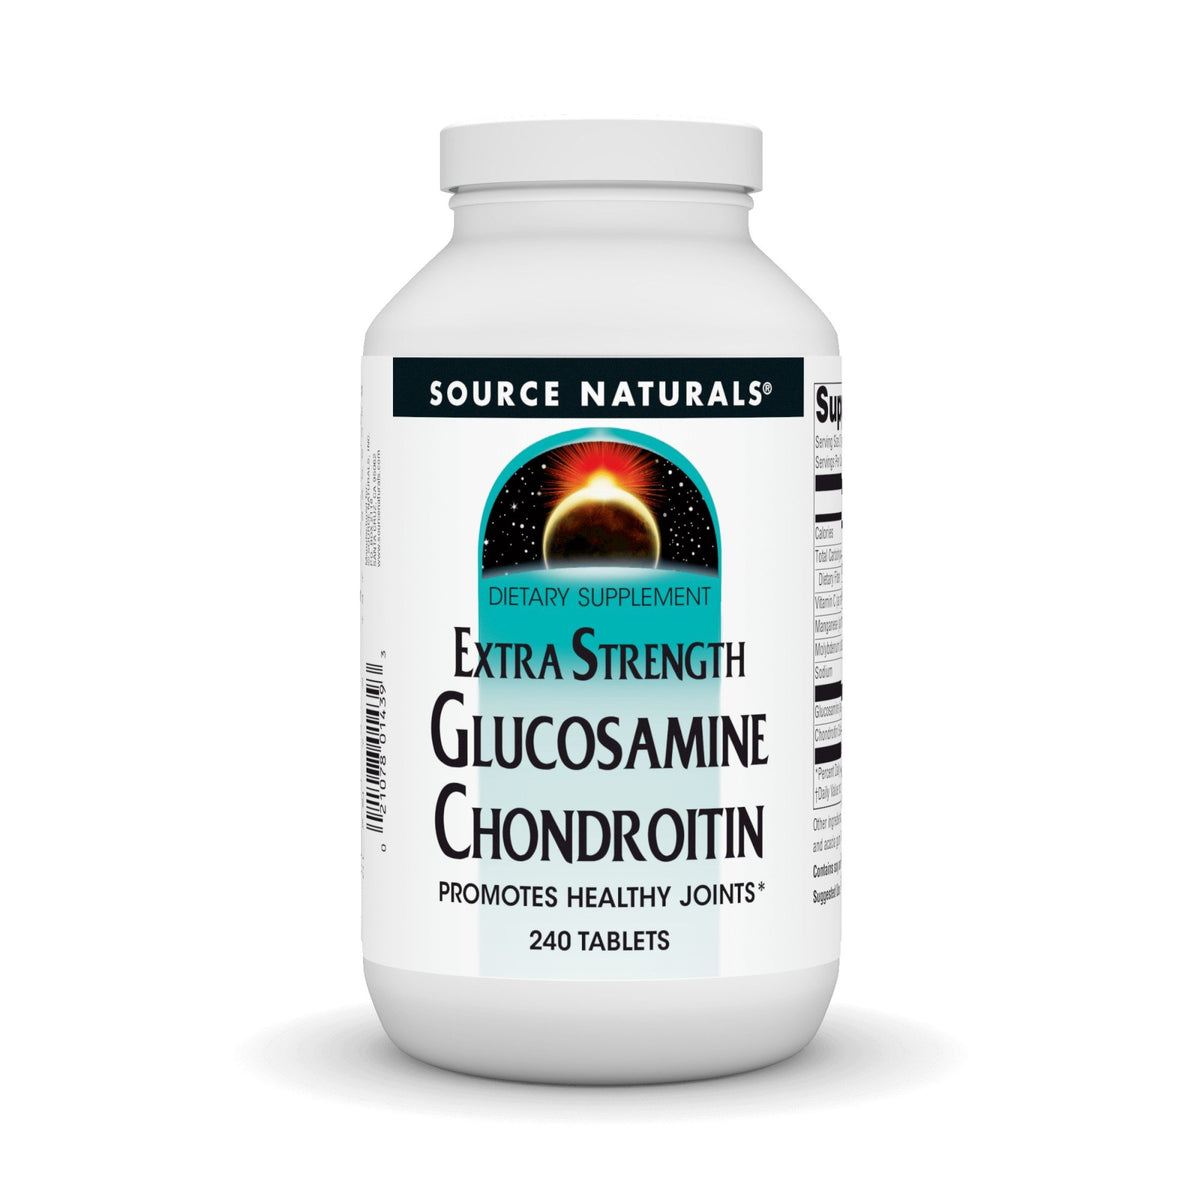 Source Naturals, Inc. Glucosamine Chondroitin Extra Strength 240 Tablet